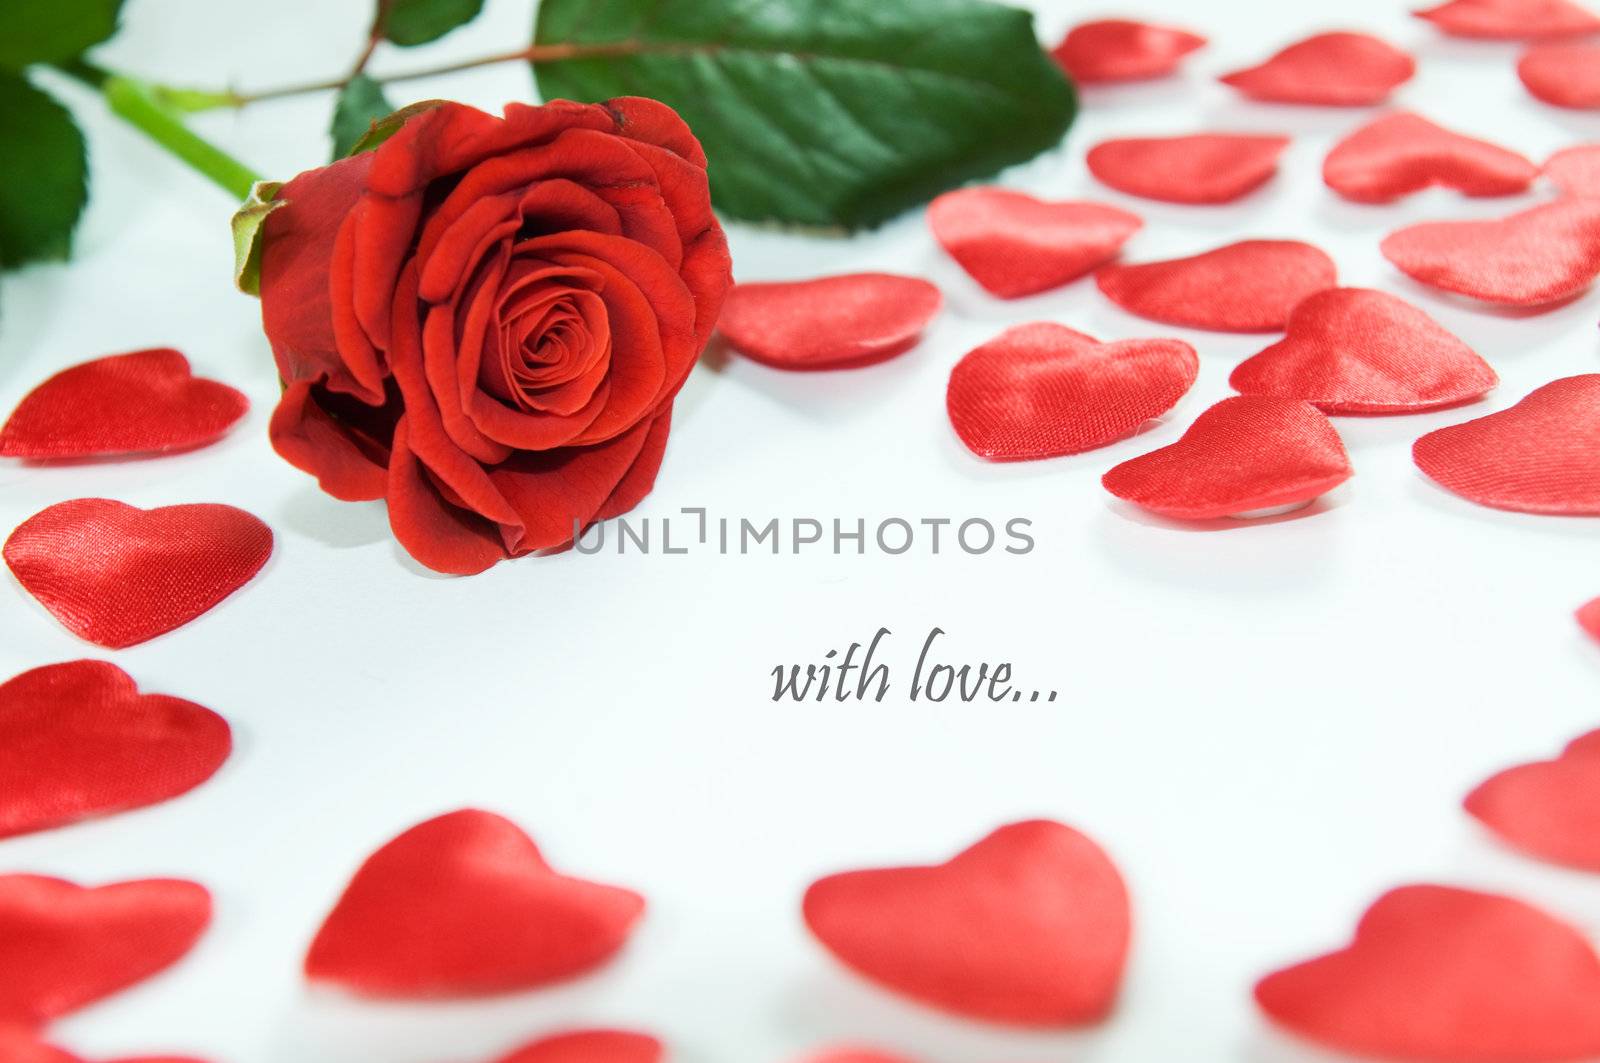 Red rose and little hears on white background. Space for your text 